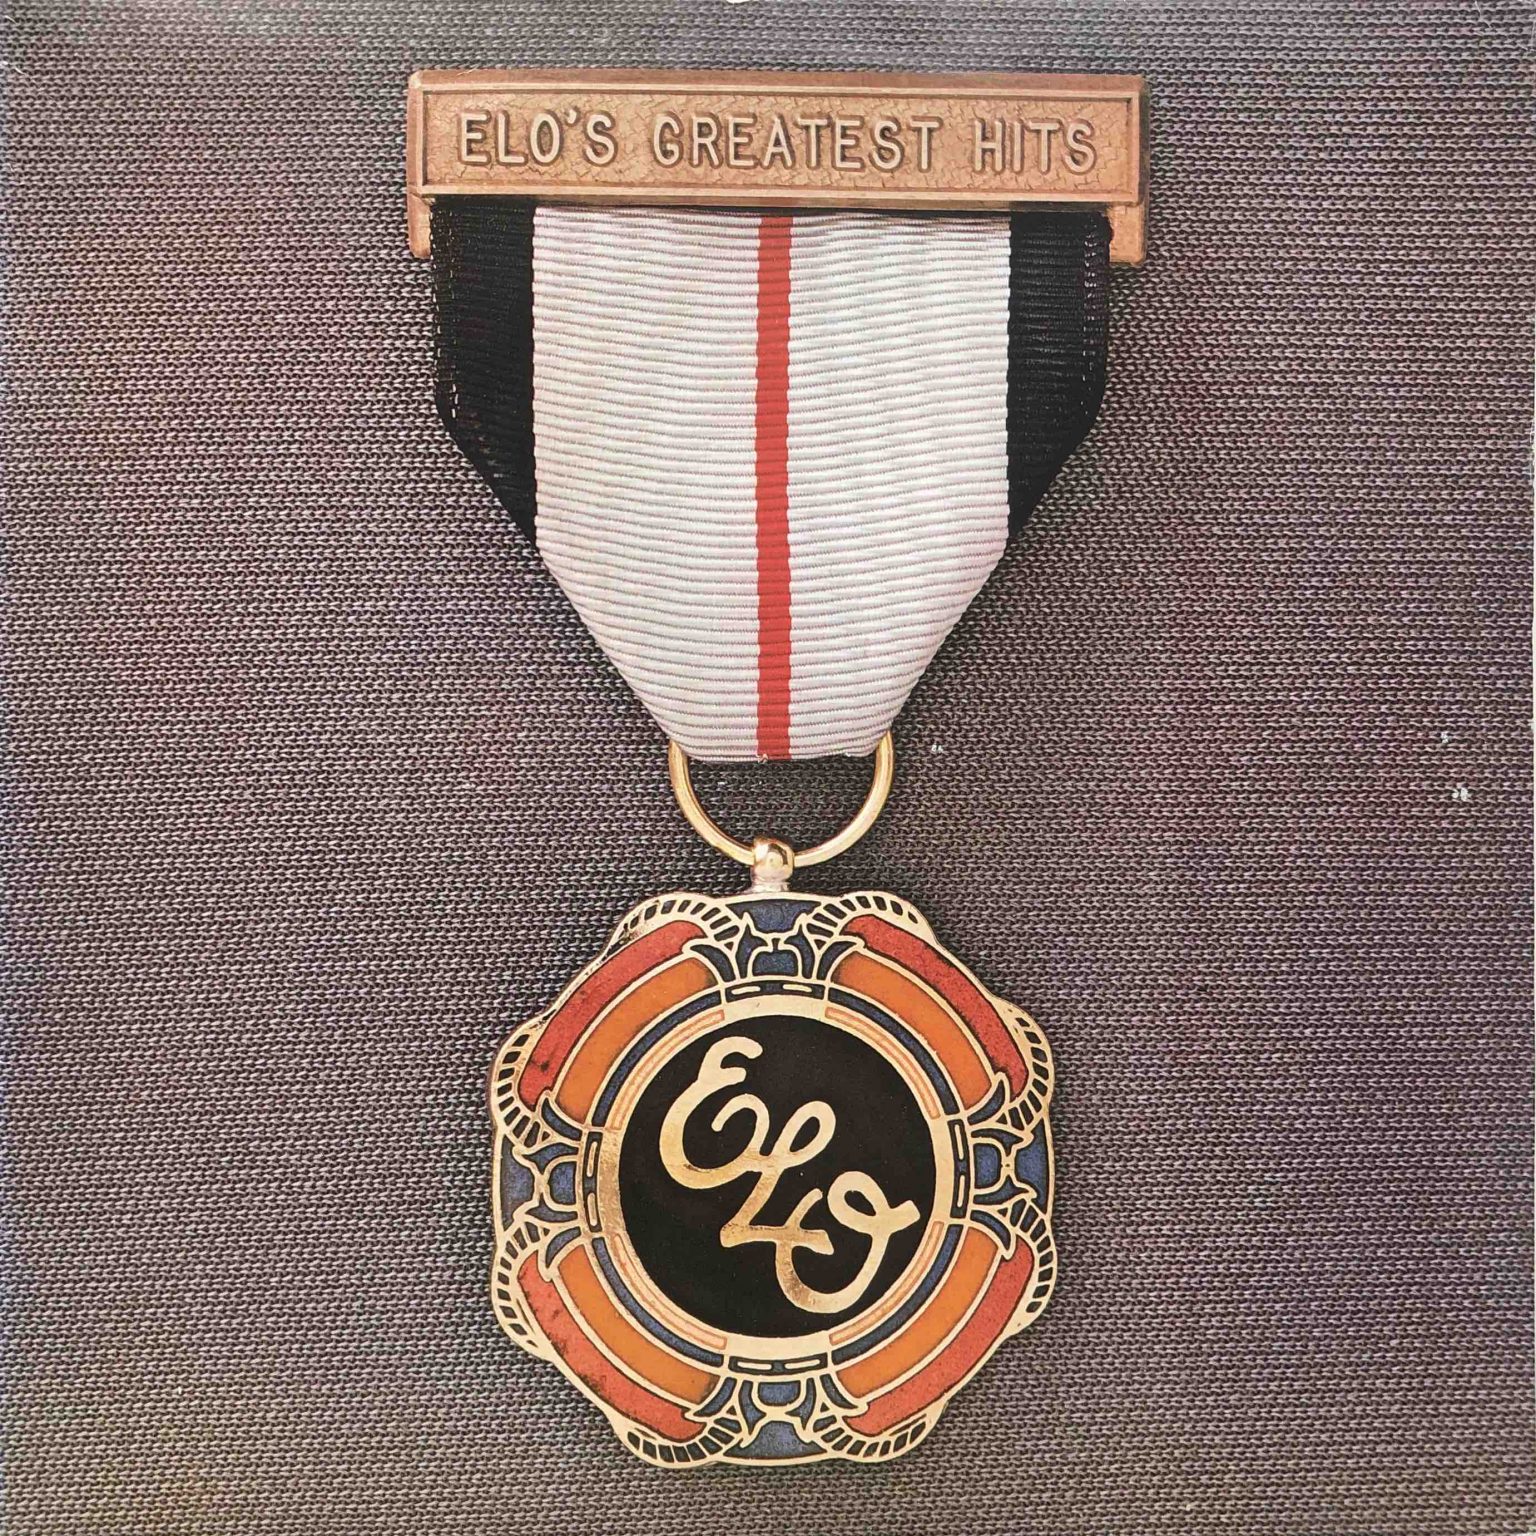 Electric Light Orchestra – Greatest Hits LP